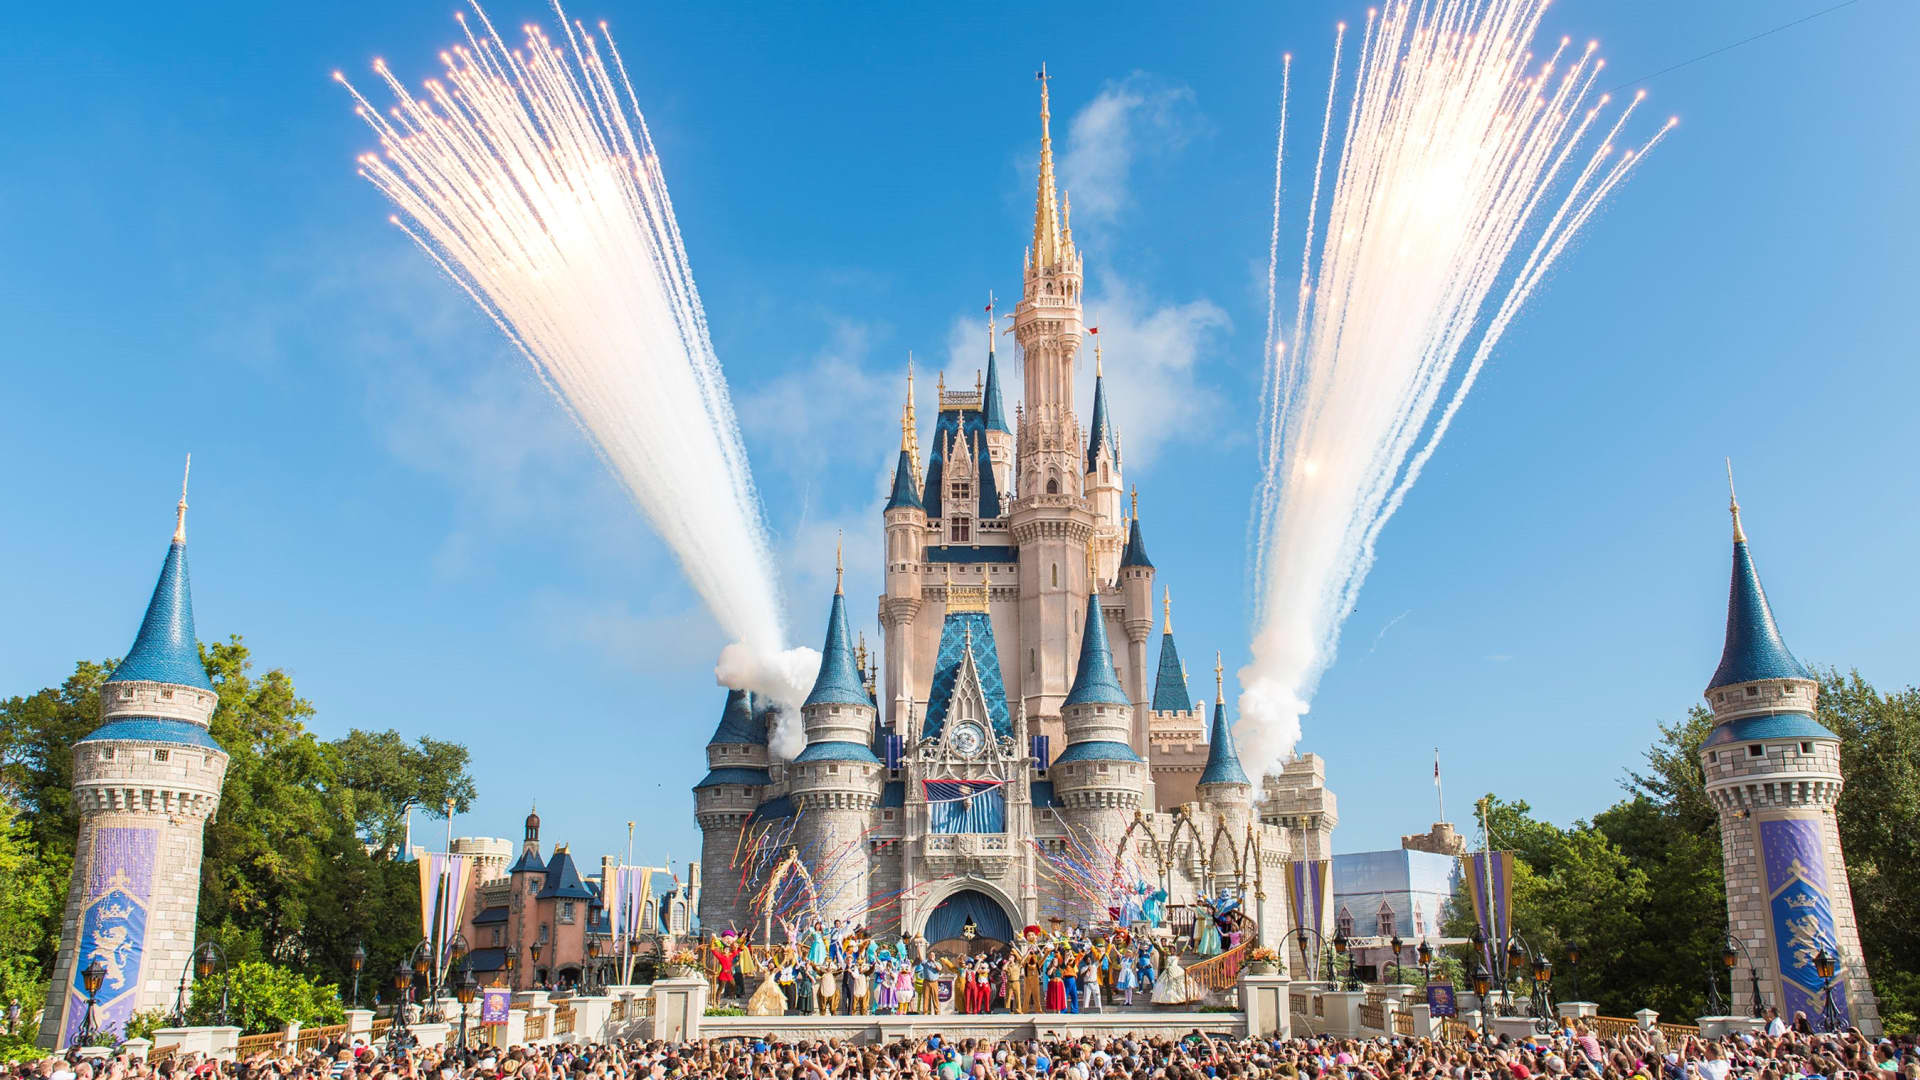 Disney nonetheless has plans to spend billions in Florida regardless of its battle with DeSantis